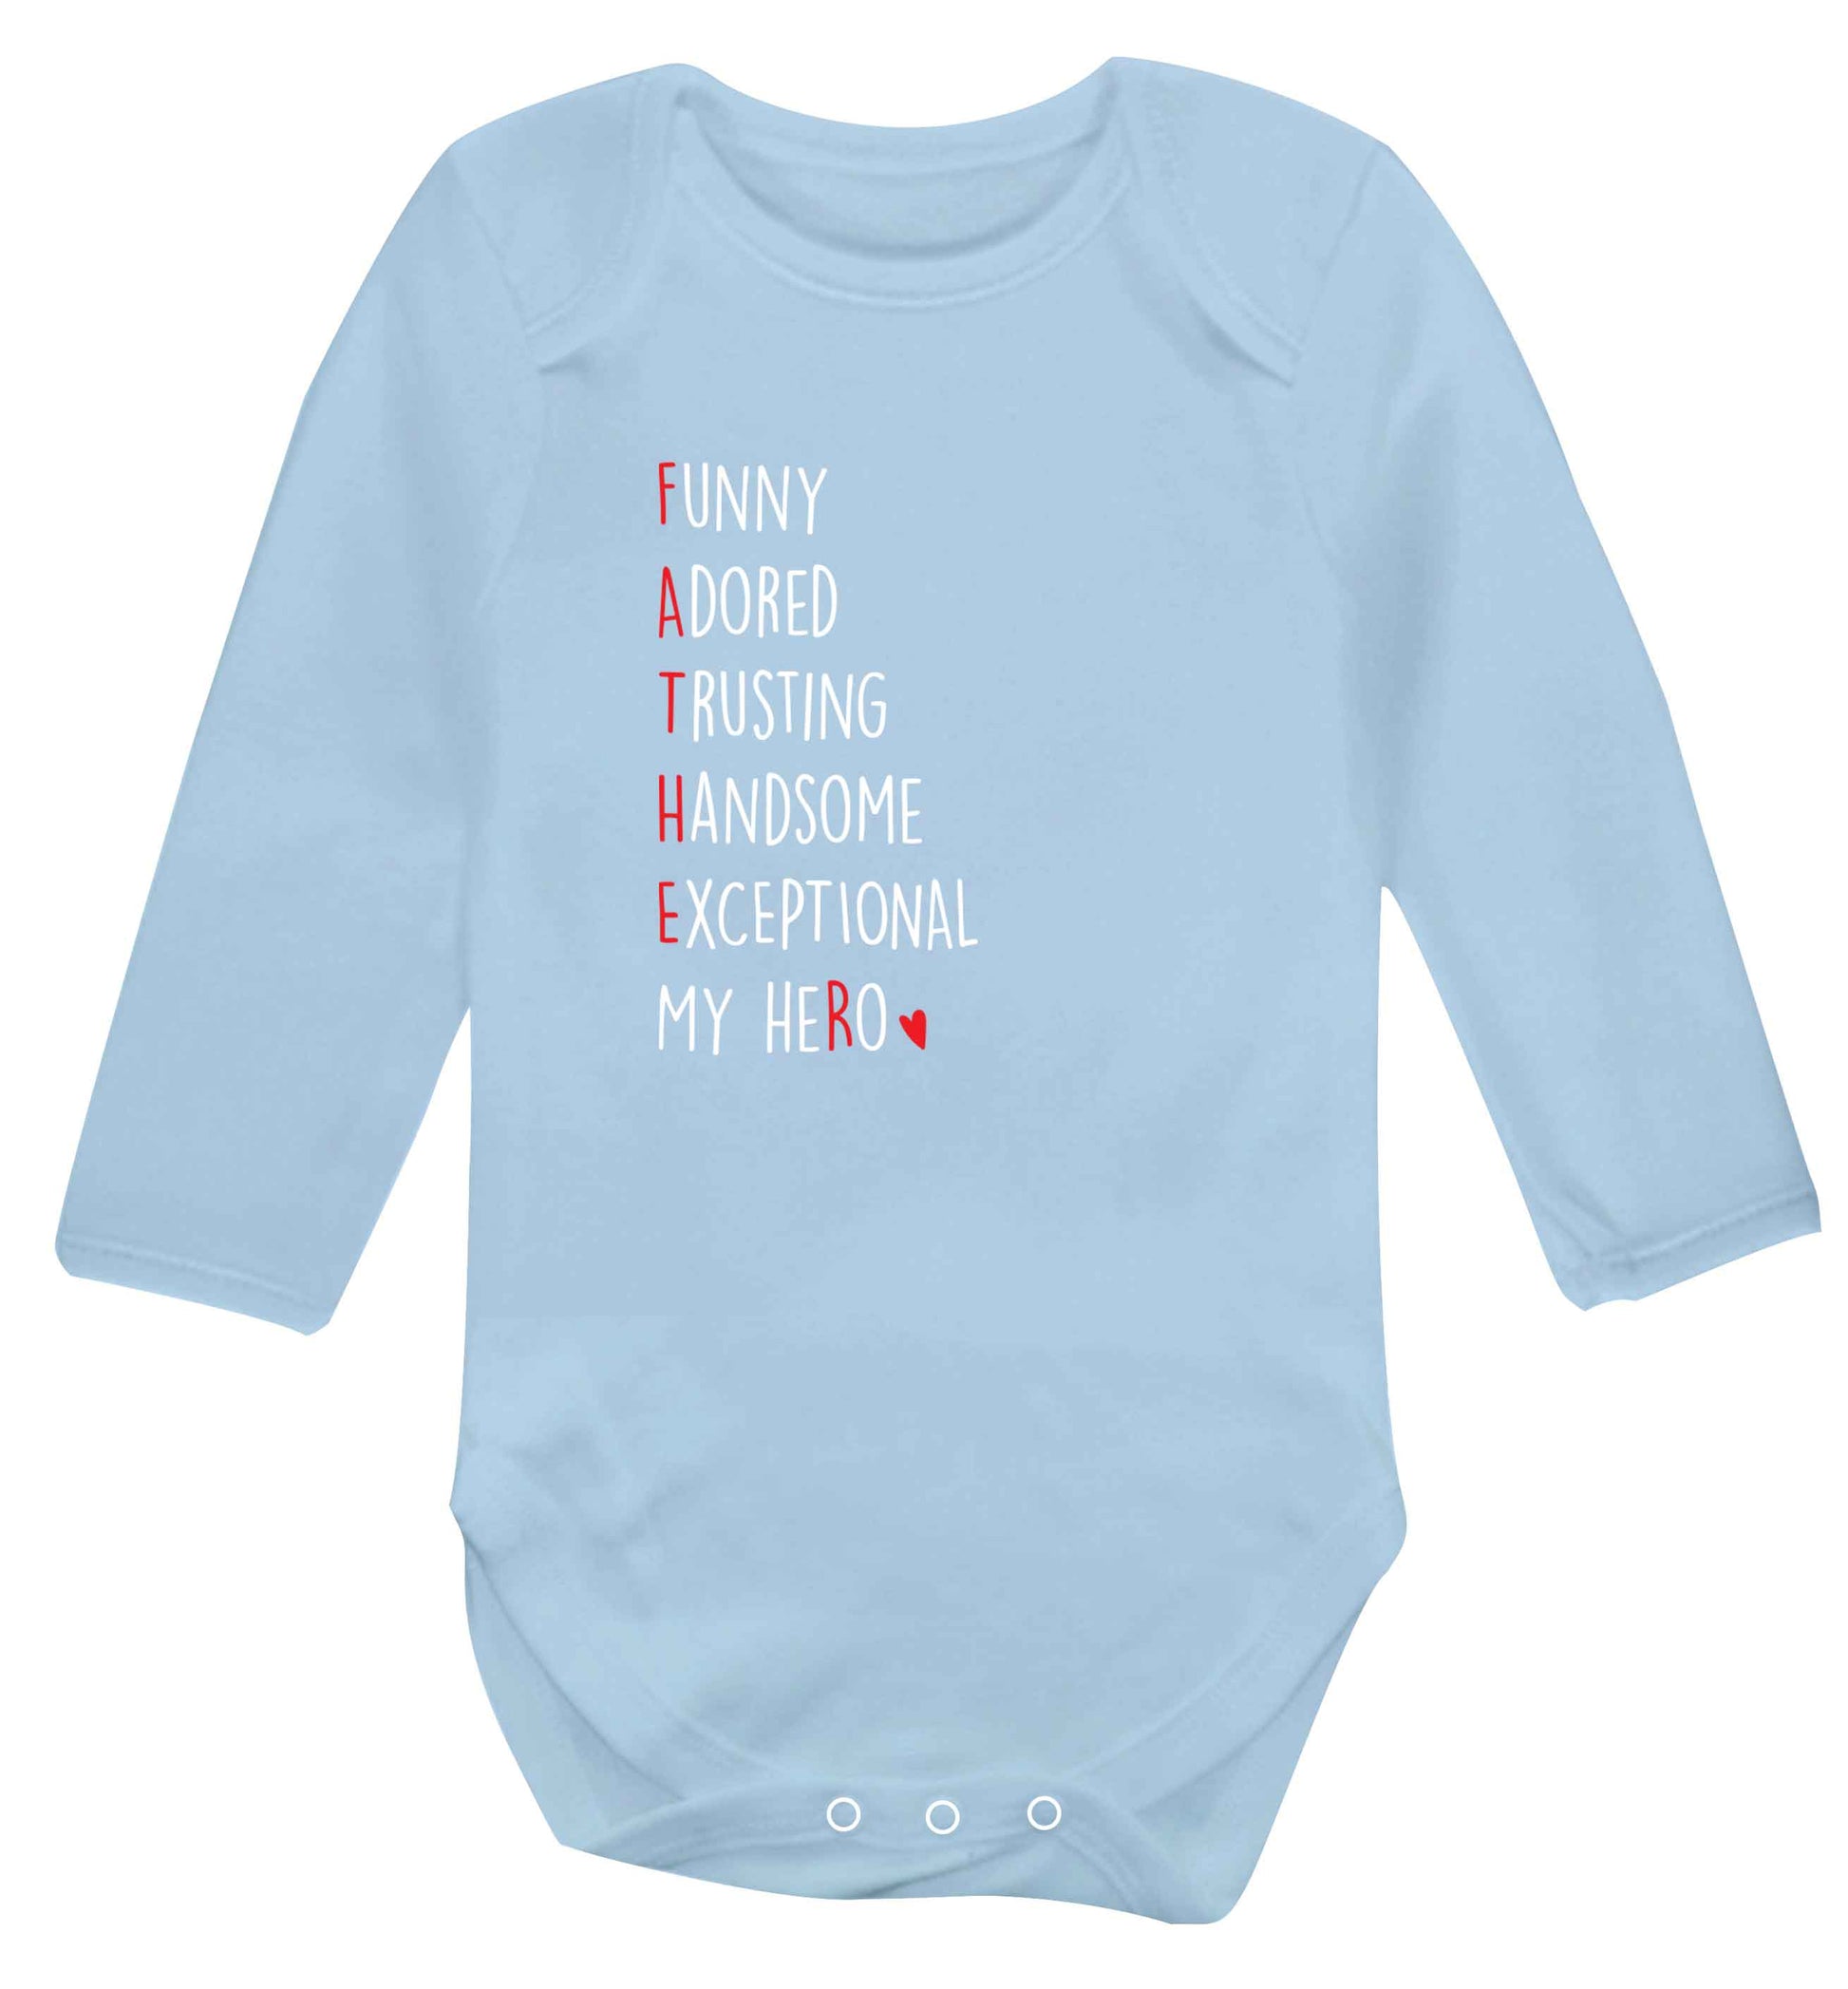 Father, funny adored trusting handsome exceptional my hero baby vest long sleeved pale blue 6-12 months